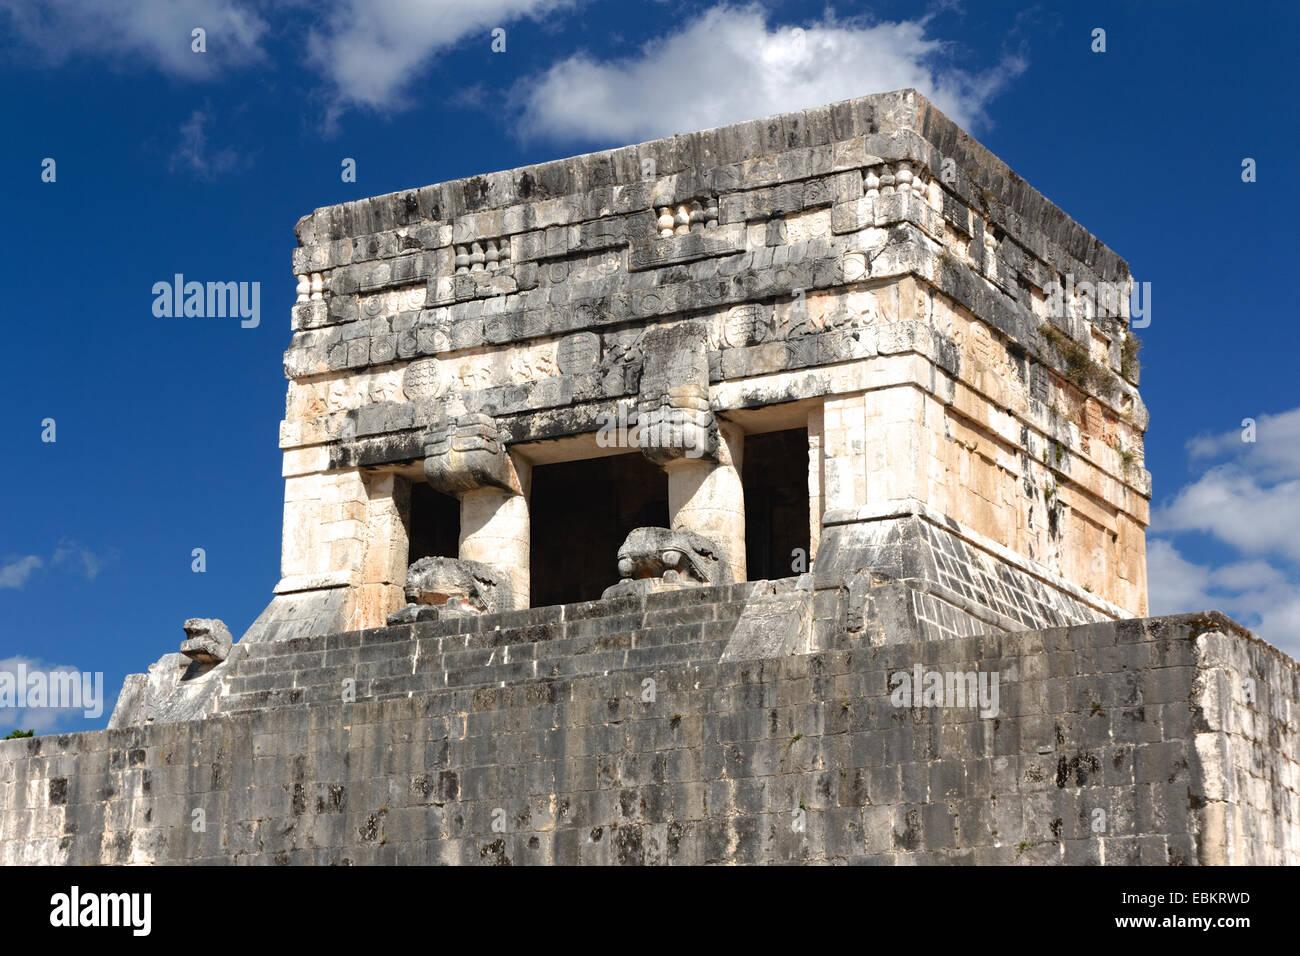 Detail of a tower at the Juego de Pelota (ball game) ruins at the Mayan city of Chichen Itza, Mexico. Stock Photo